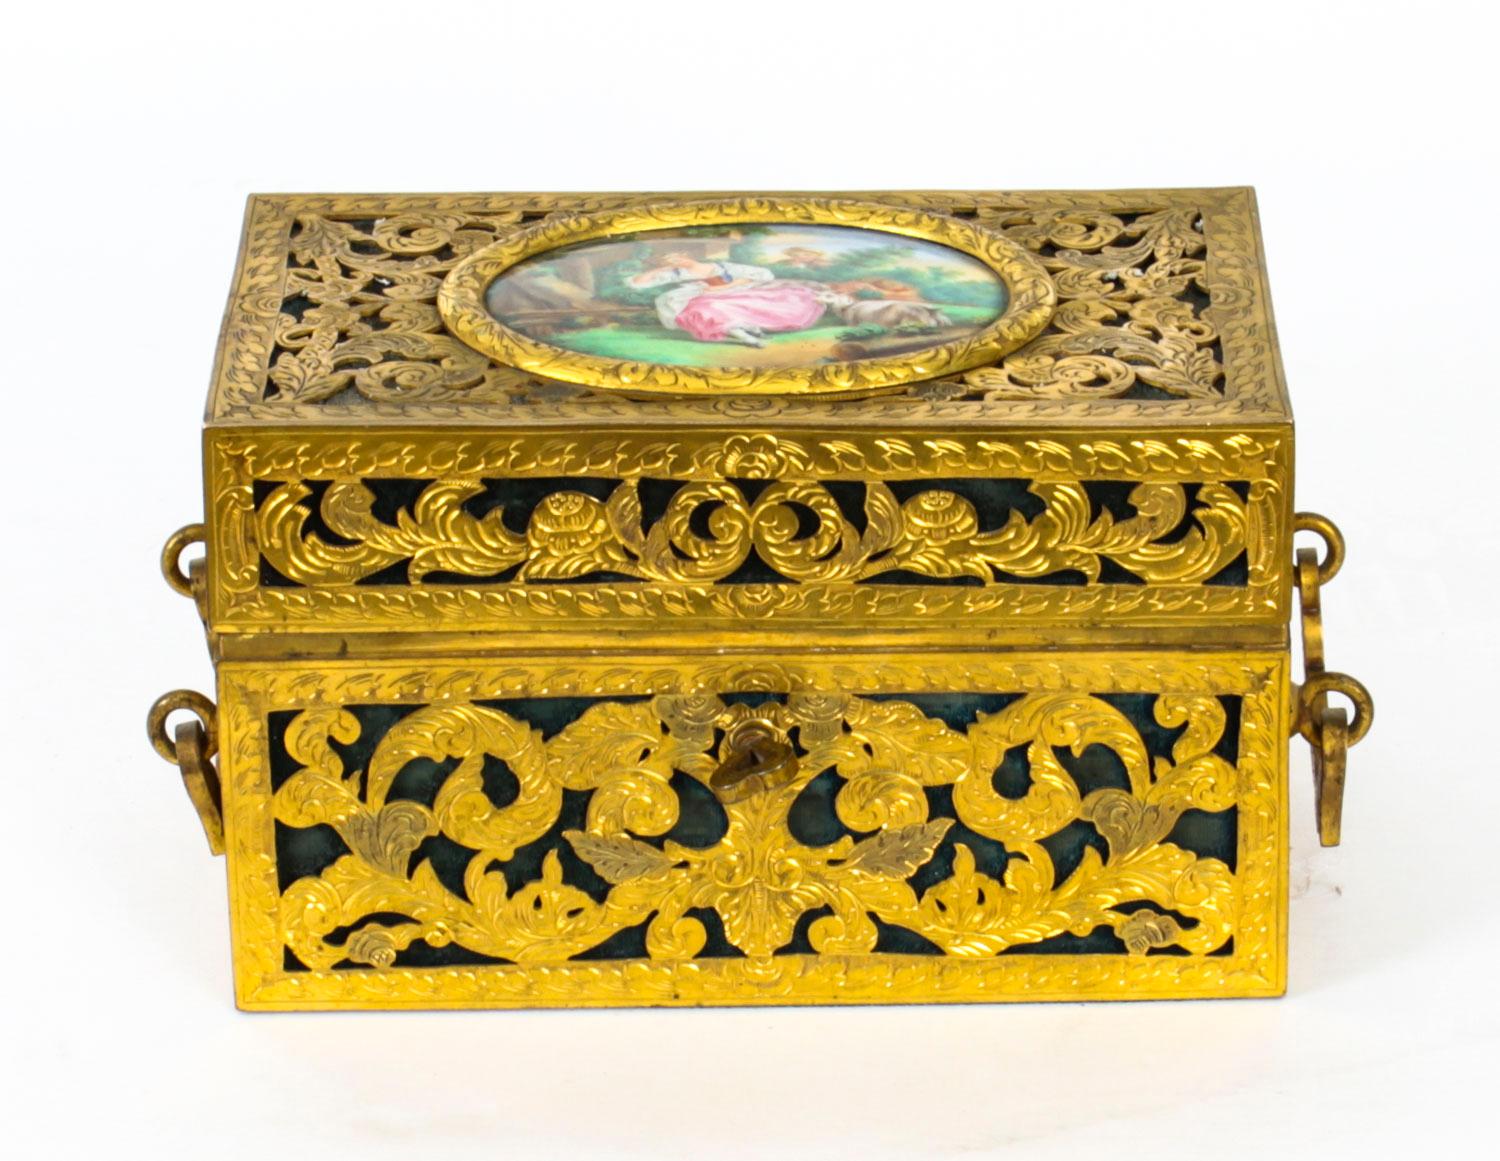 This is a stunning antique 19th century French Palais Royal pierced brass and porcelain mounted domed rectangular table casket , Circa 1870 in date. 

The locking cover enclosing velvet-lined interior, the whole cage work cast with two handles.